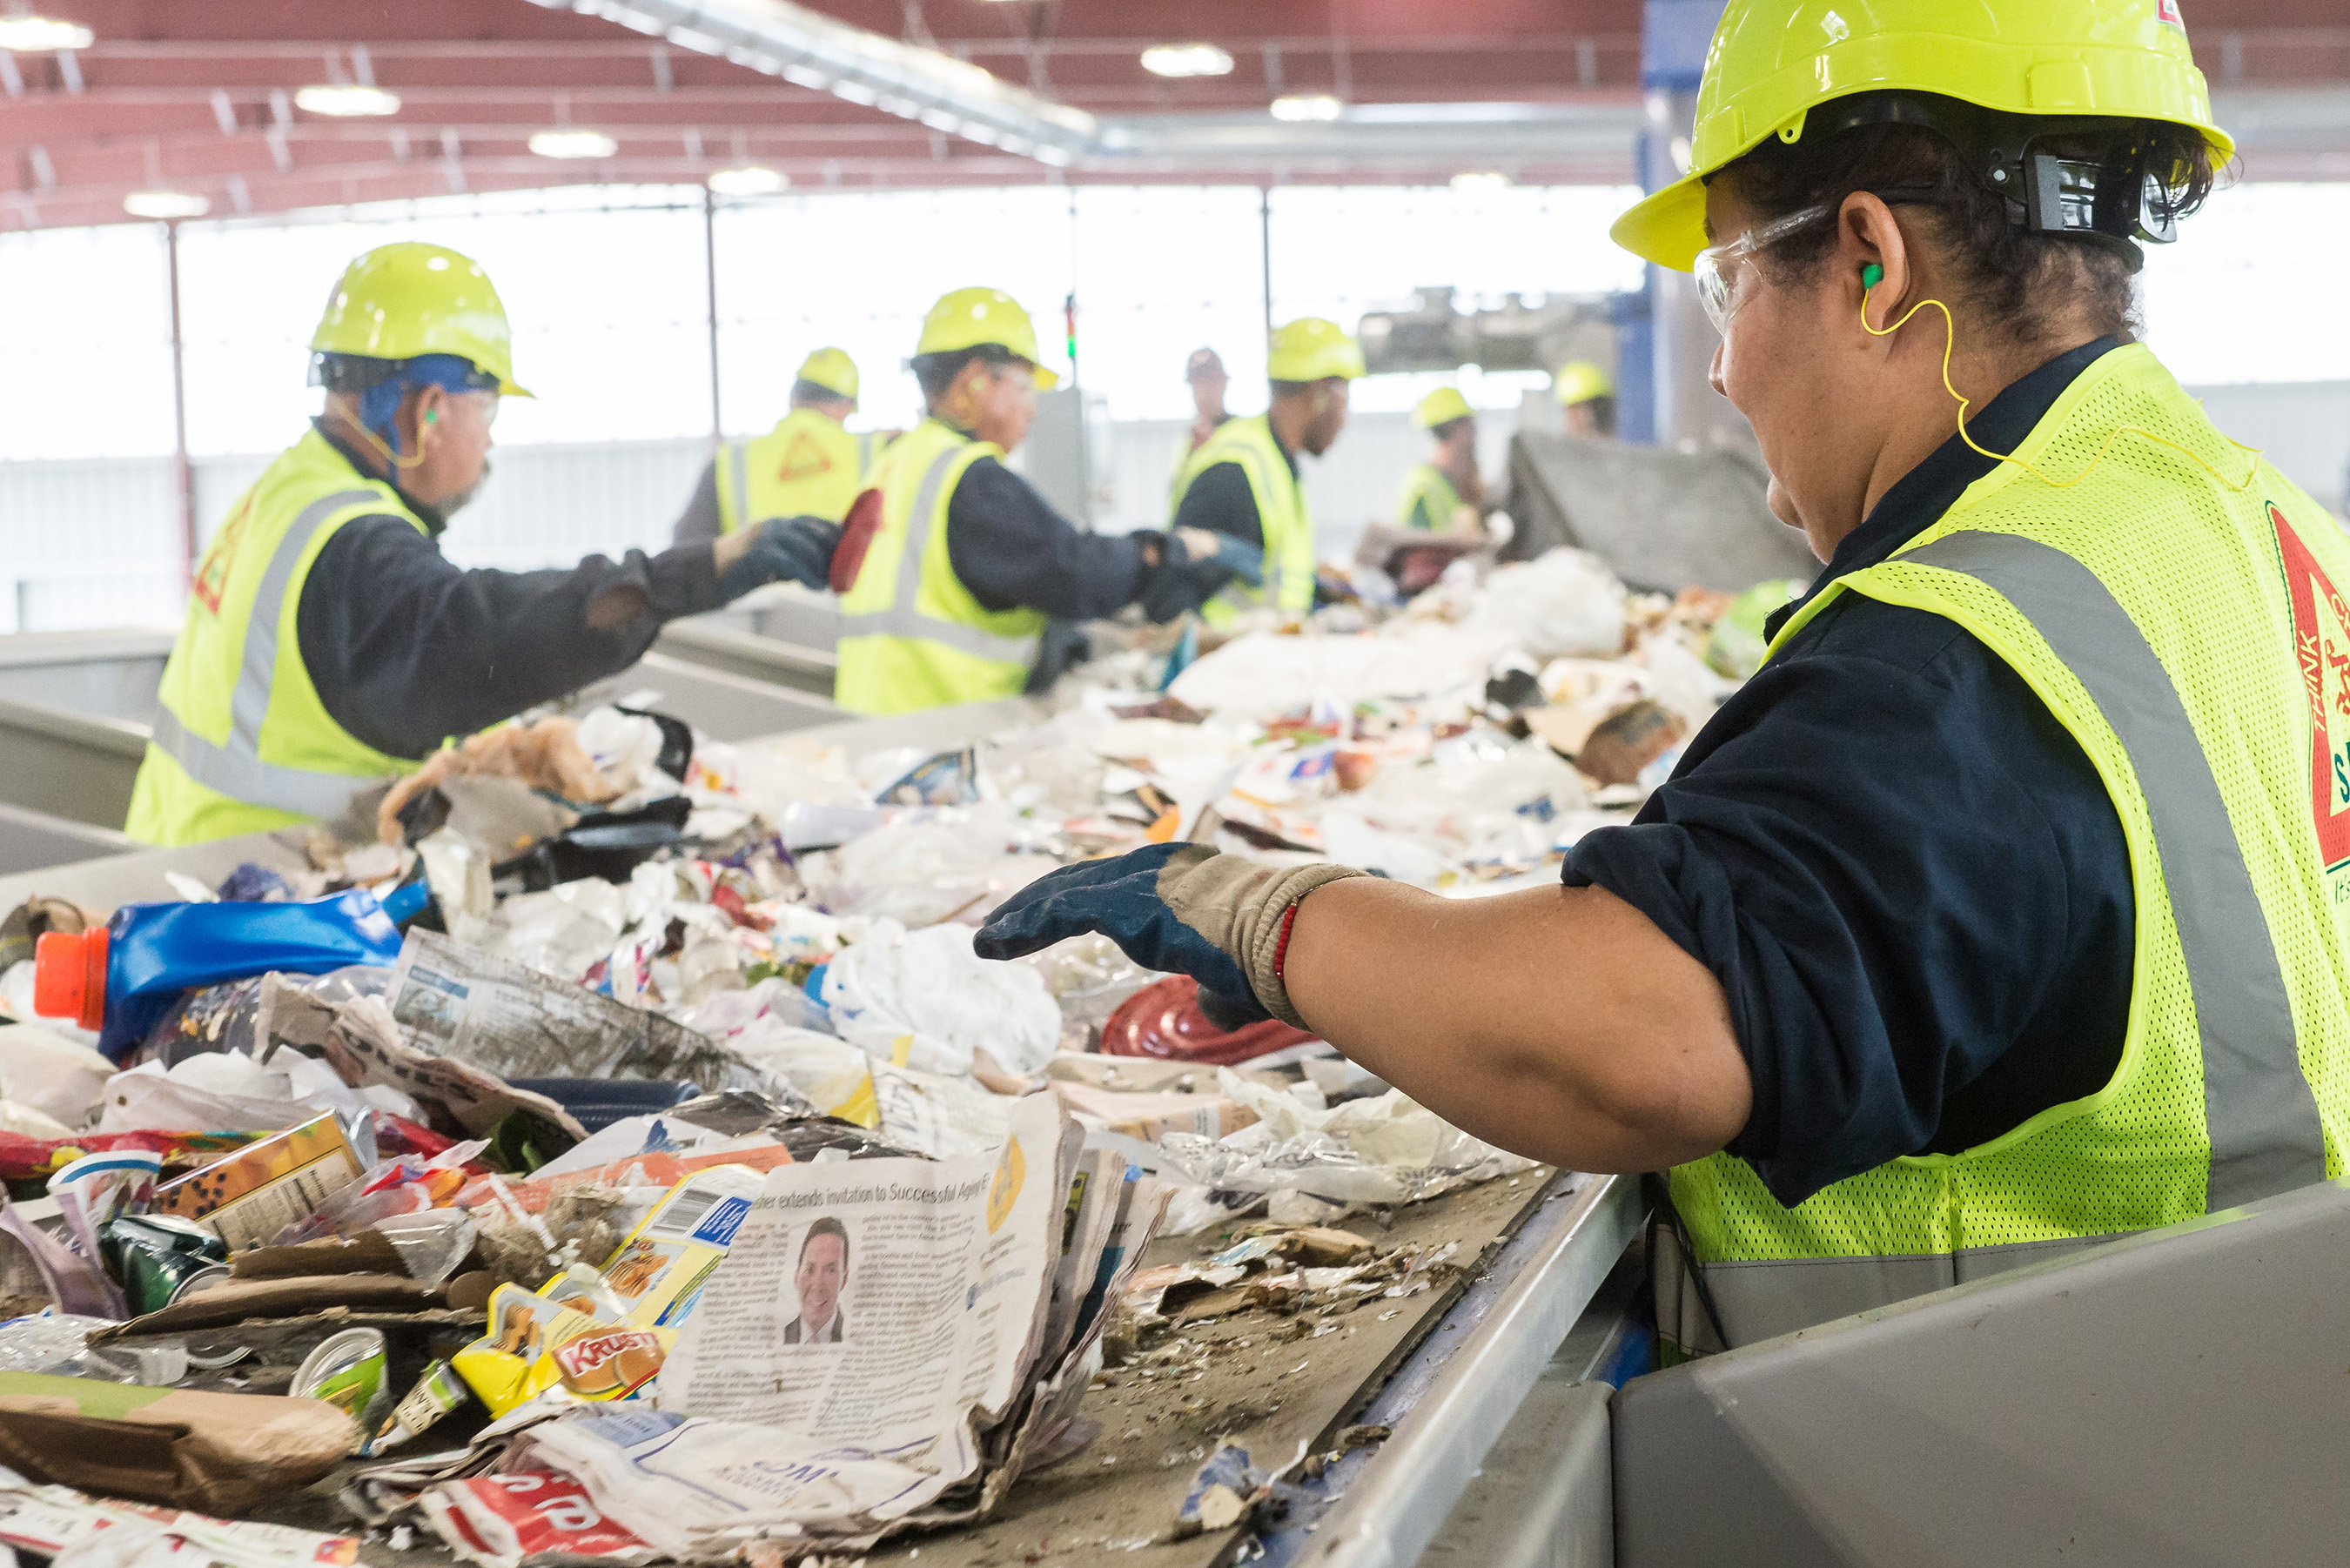 Recycled items at Republic's Southern Nevada facility can travel up to 1 mile in 2.5 min on the conveyor belt